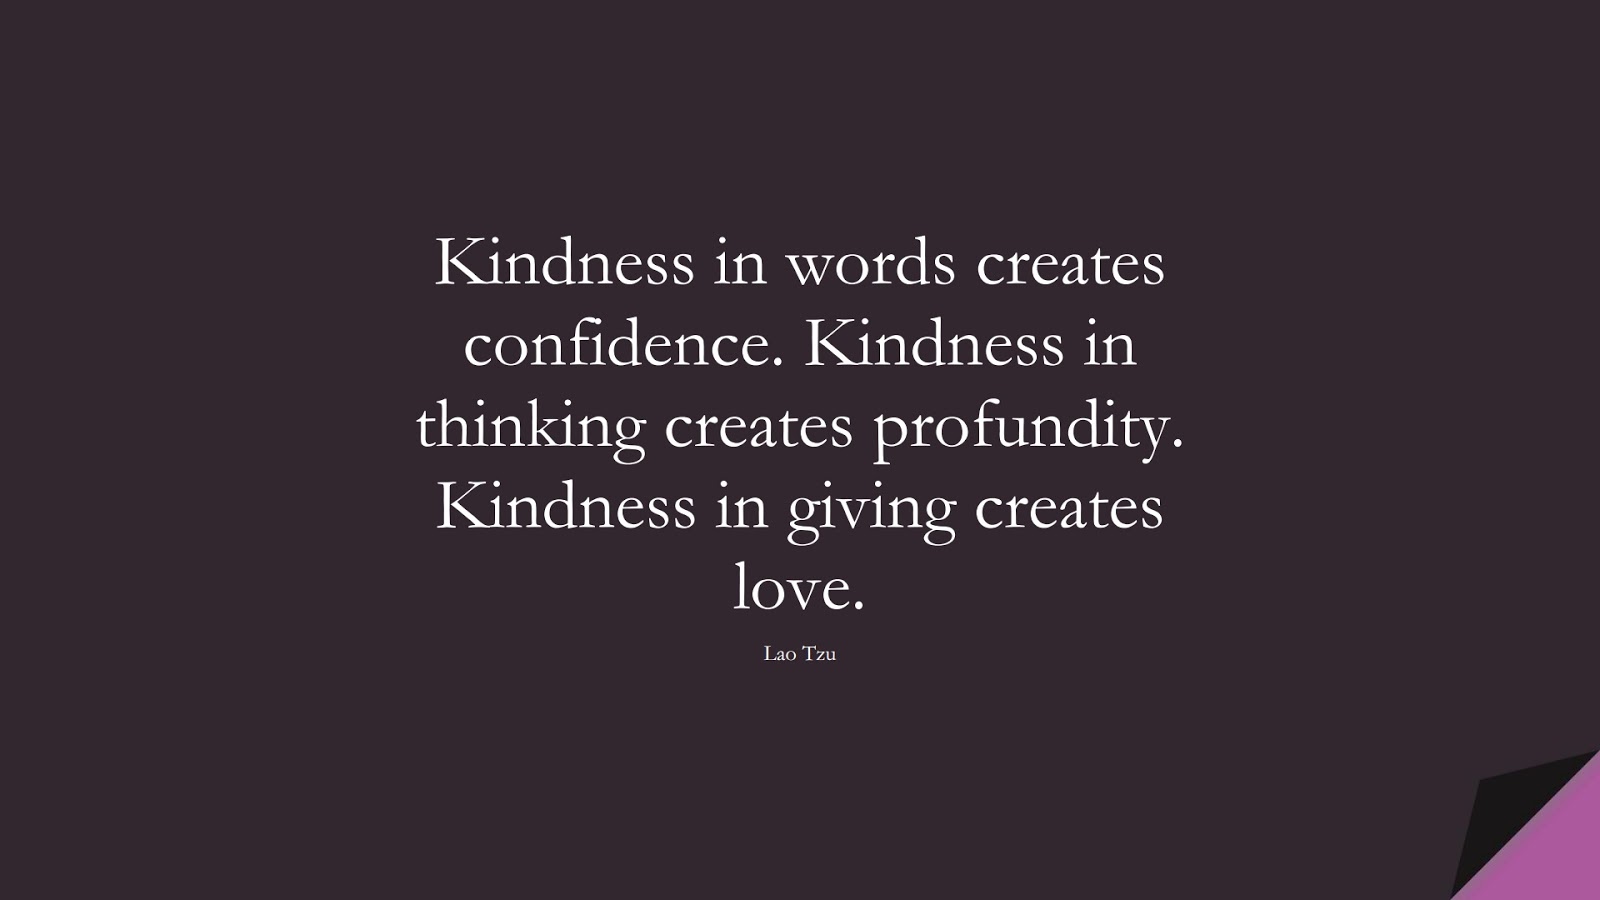 Kindness in words creates confidence. Kindness in thinking creates profundity. Kindness in giving creates love. (Lao Tzu);  #LoveQuotes